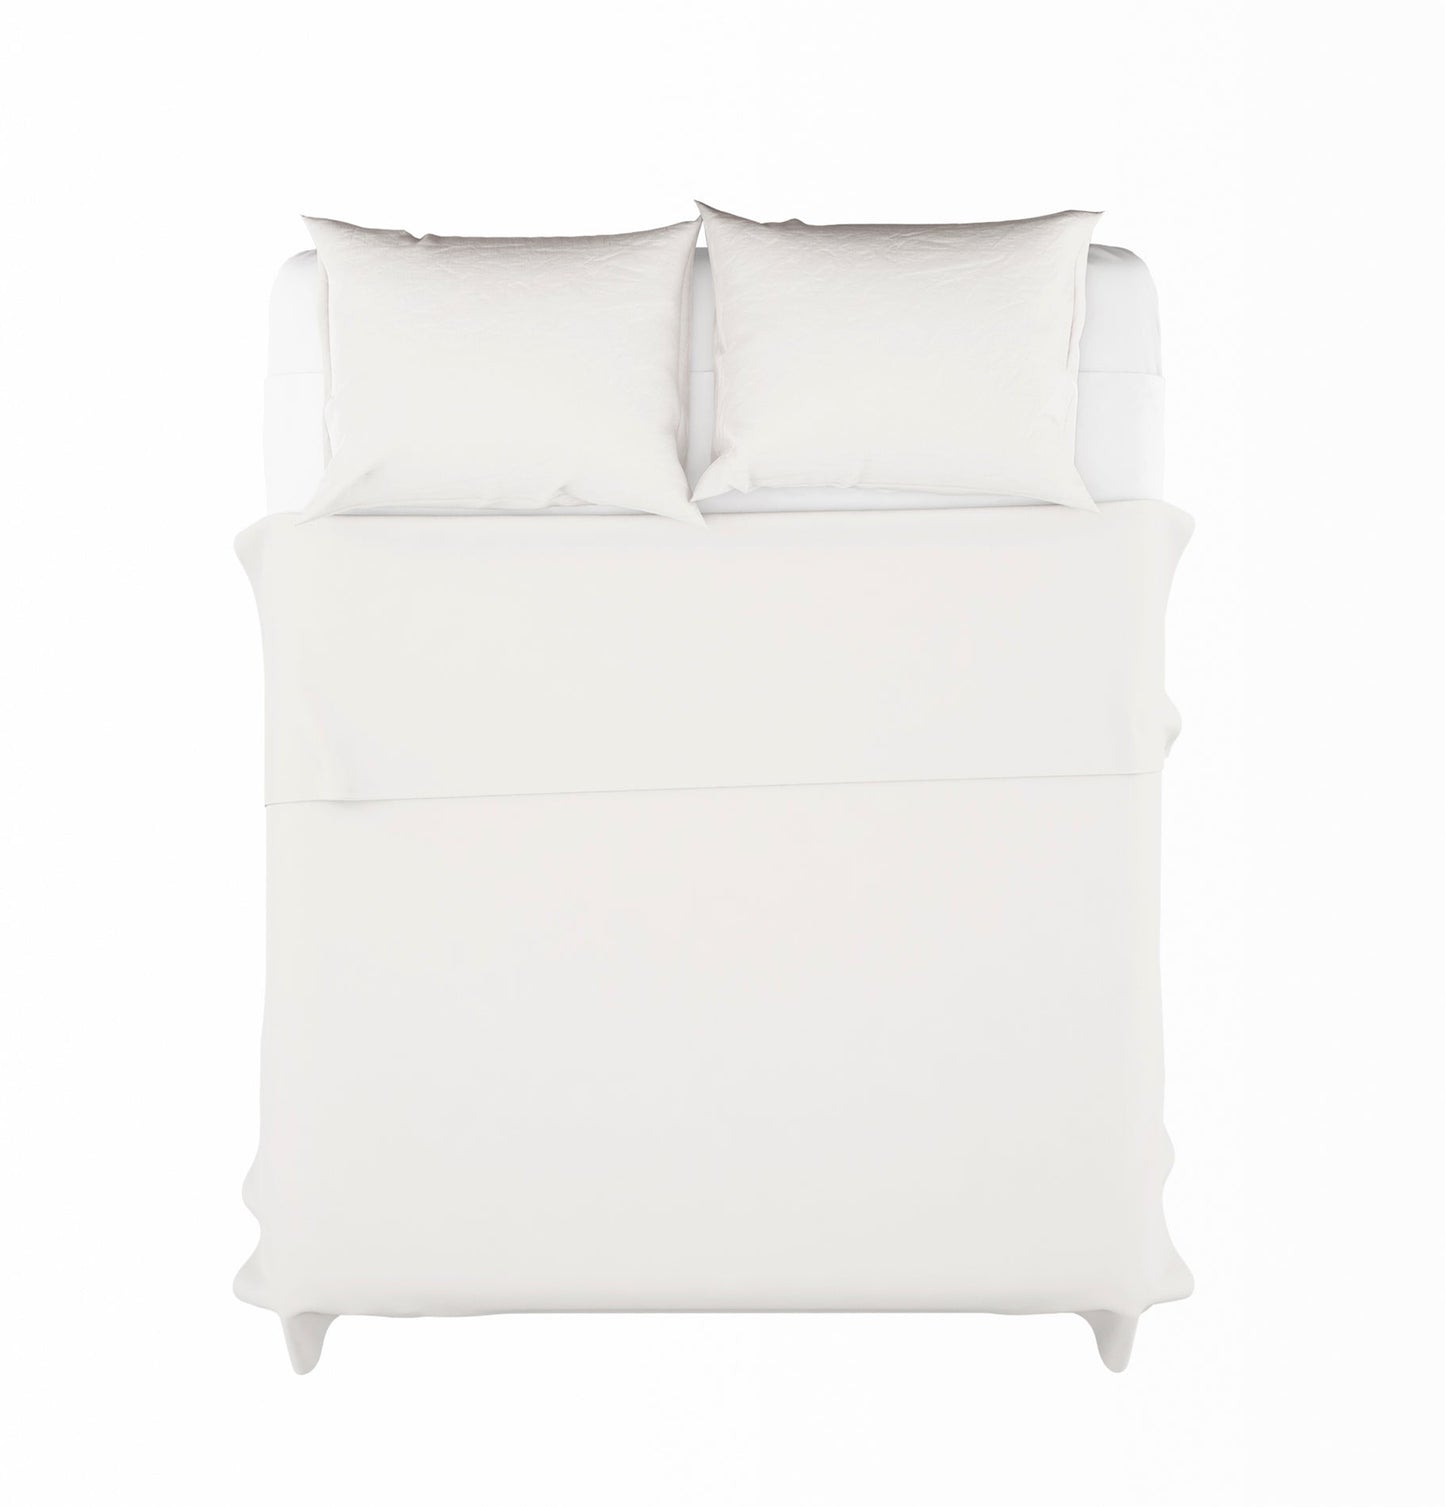 Smooth Top Sheet Percale 200h White Bed 105